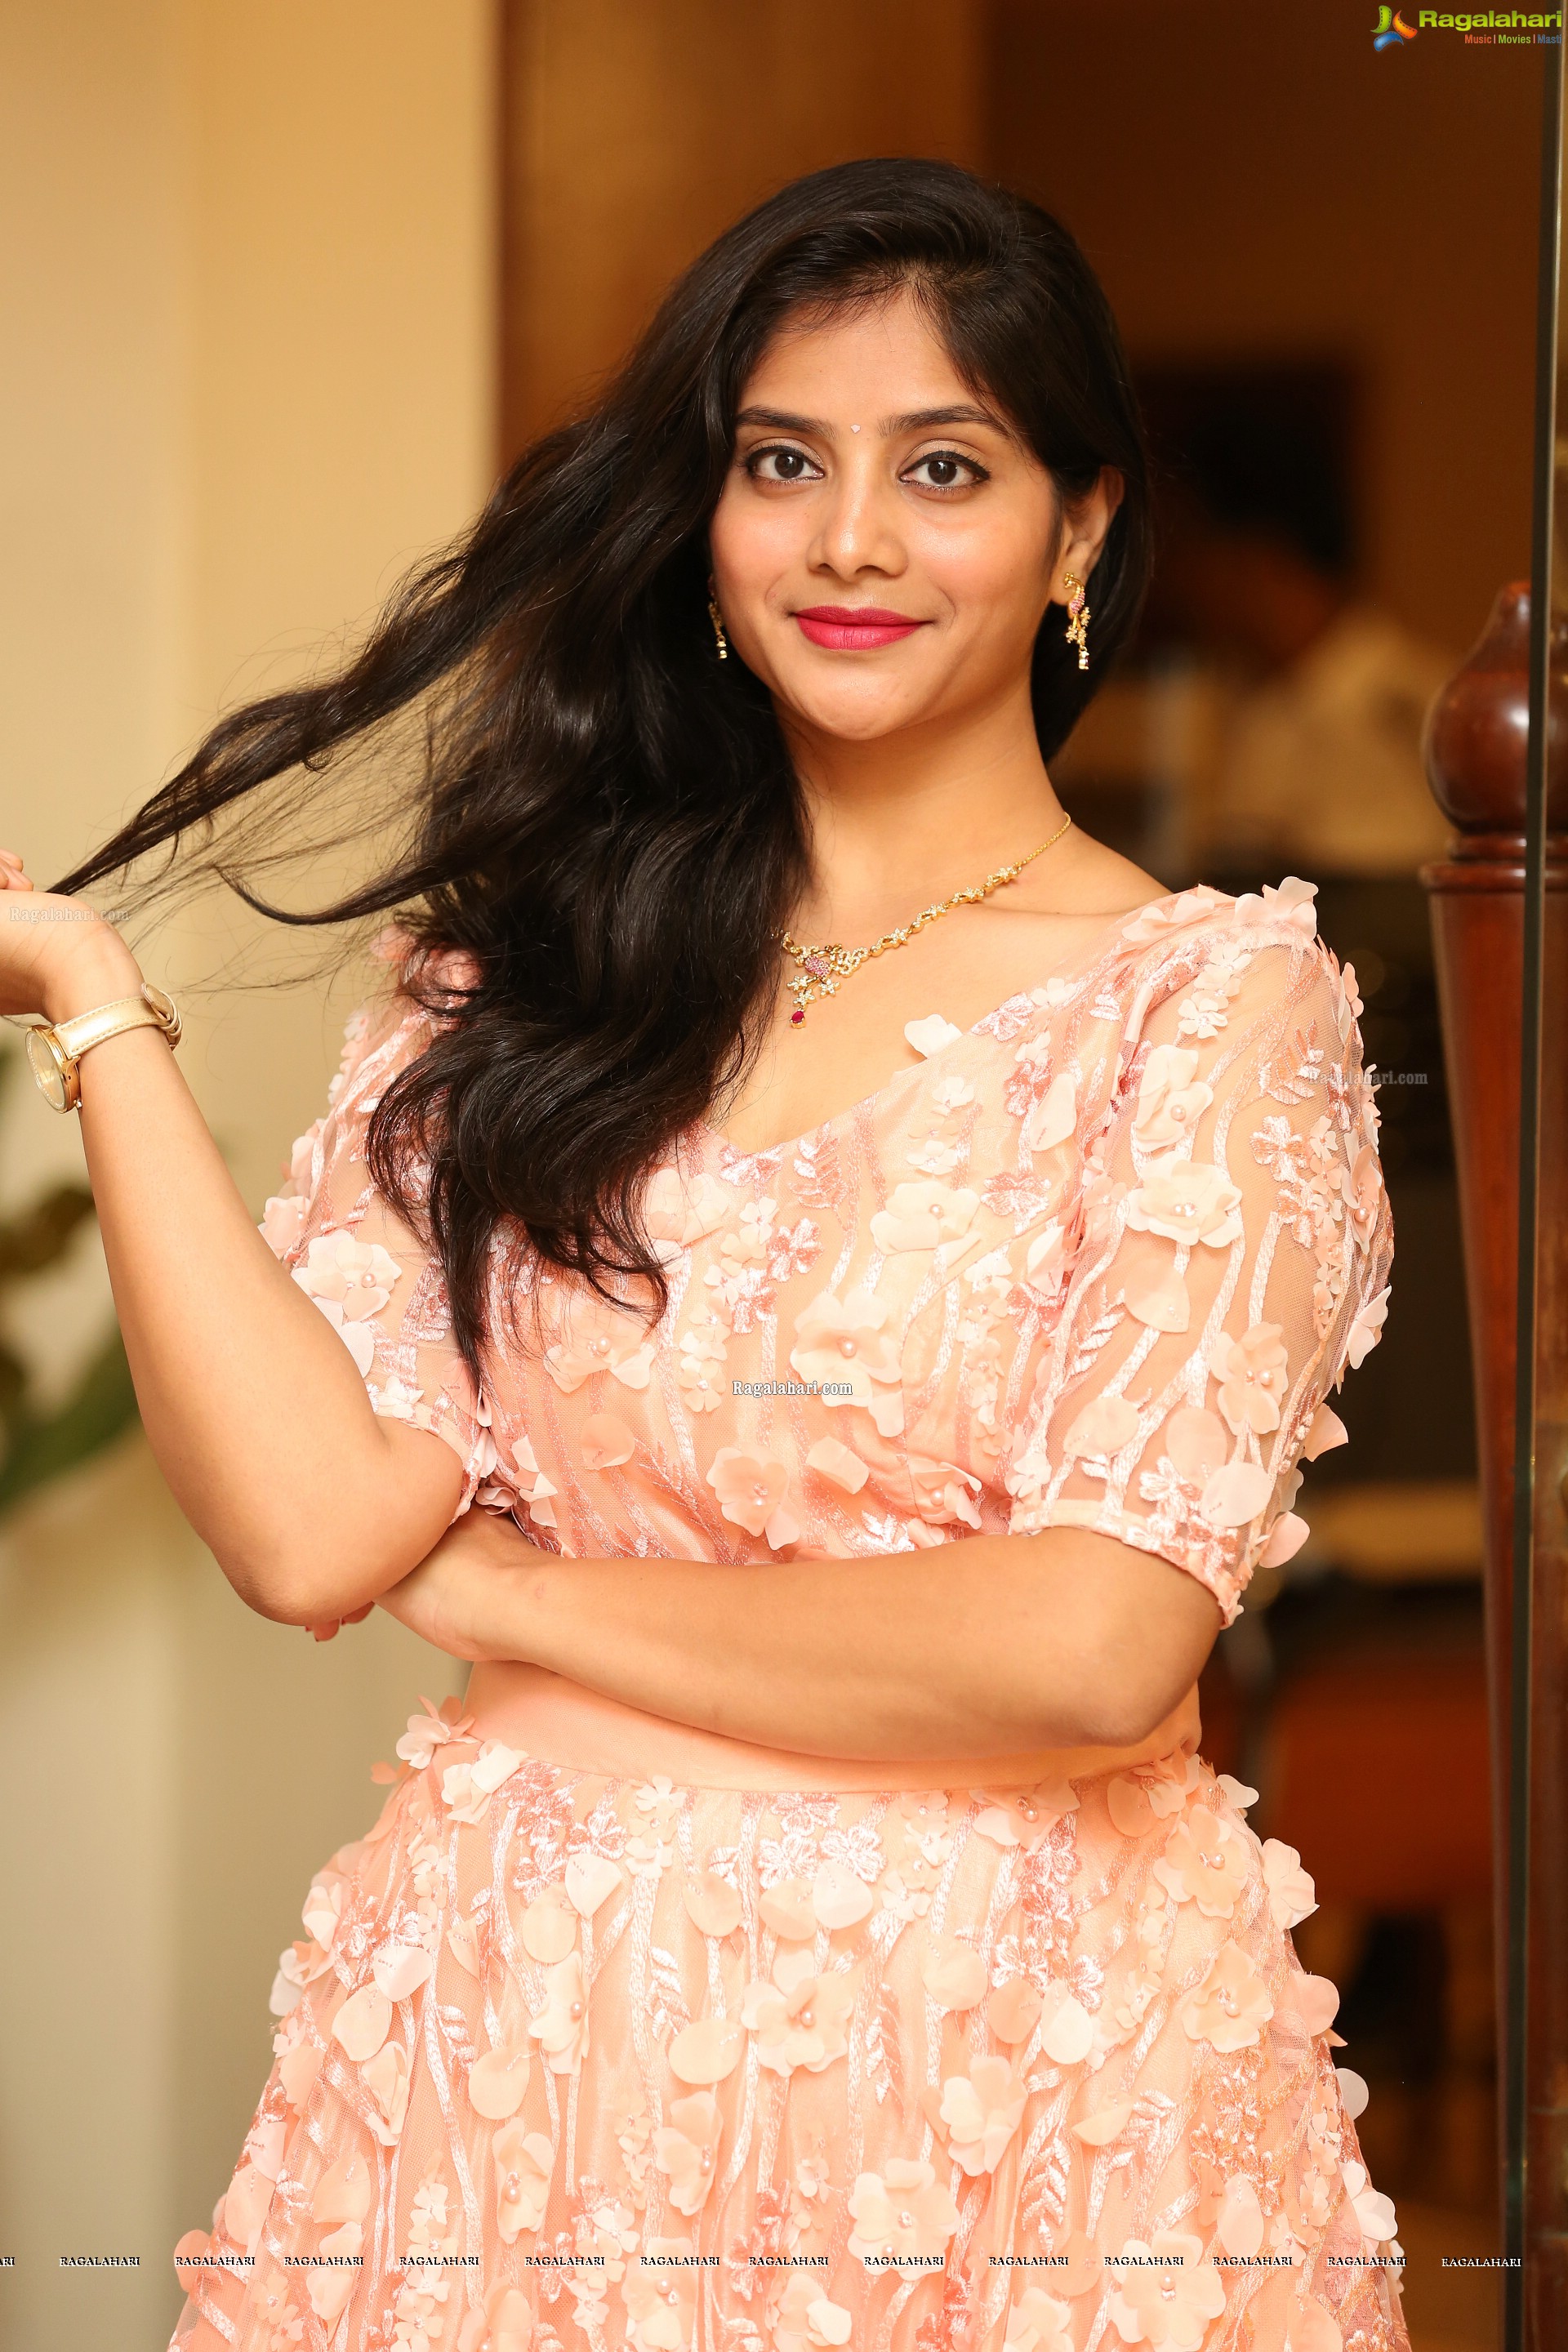 Anuhya at The Haat Fashion & Lifestyle Expo - HD Gallery